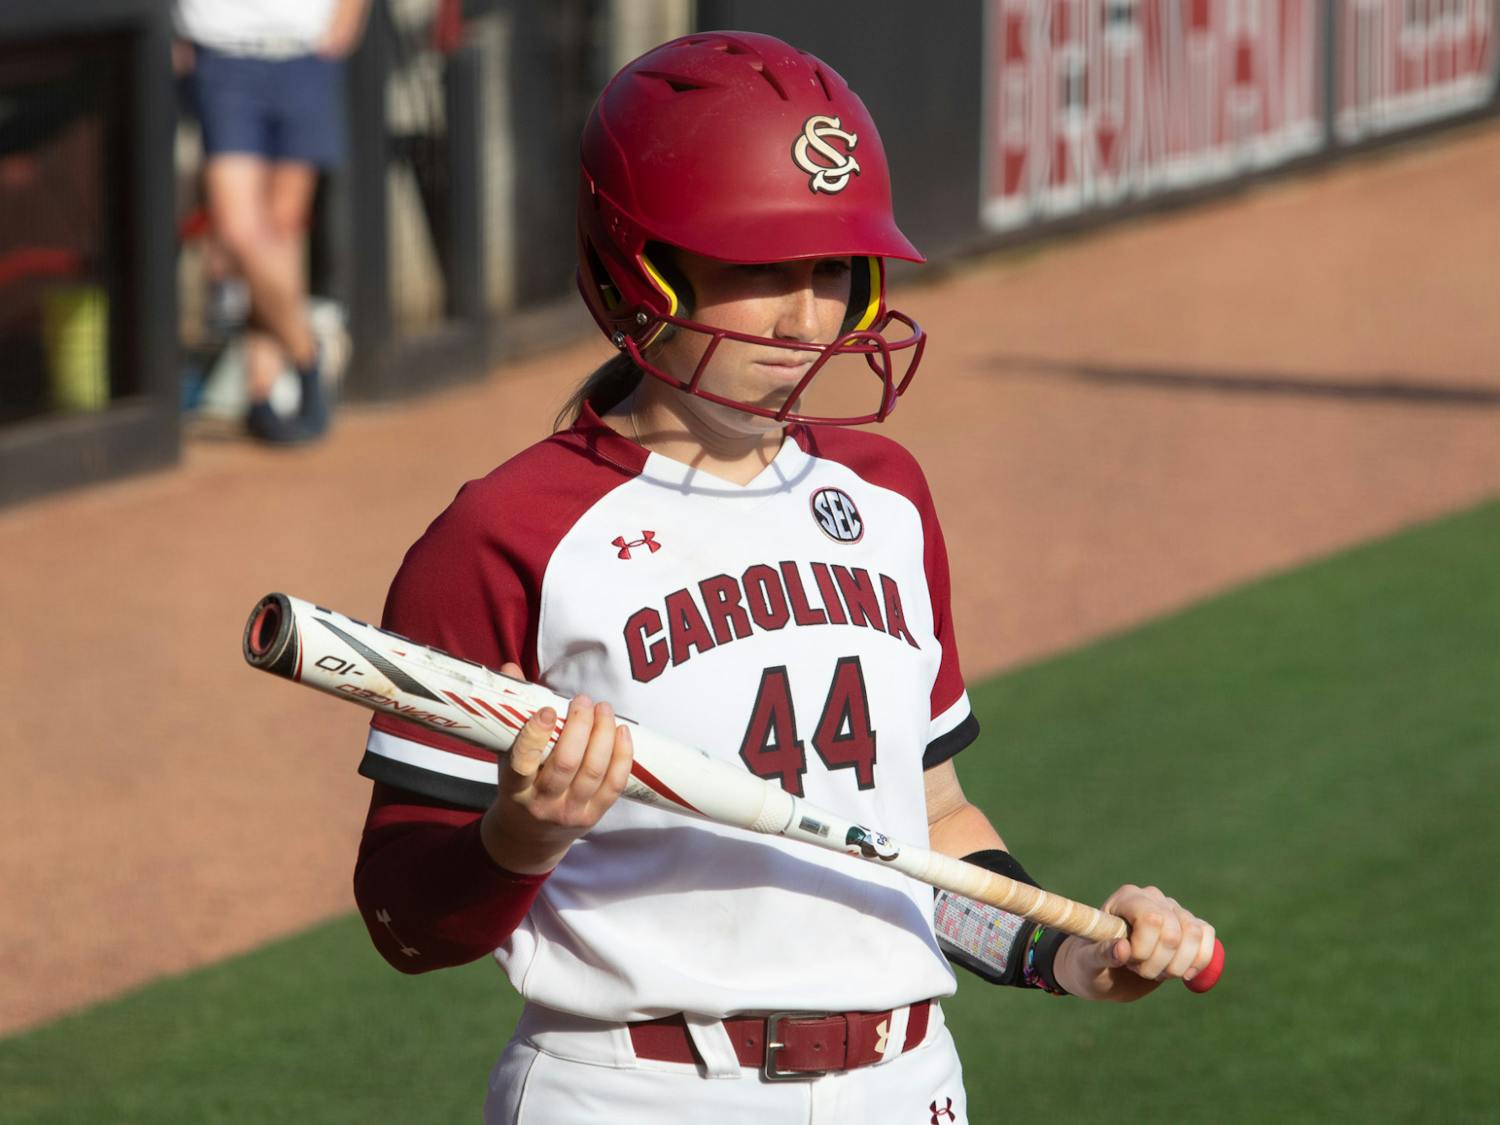 Sophomore infielder Emma Sellers prepares to bat against Charleston Southern on April 19, 2023. The Gamecocks beat the Buccaneers for the second time in the day, winning 11-2 after five innings. &nbsp;